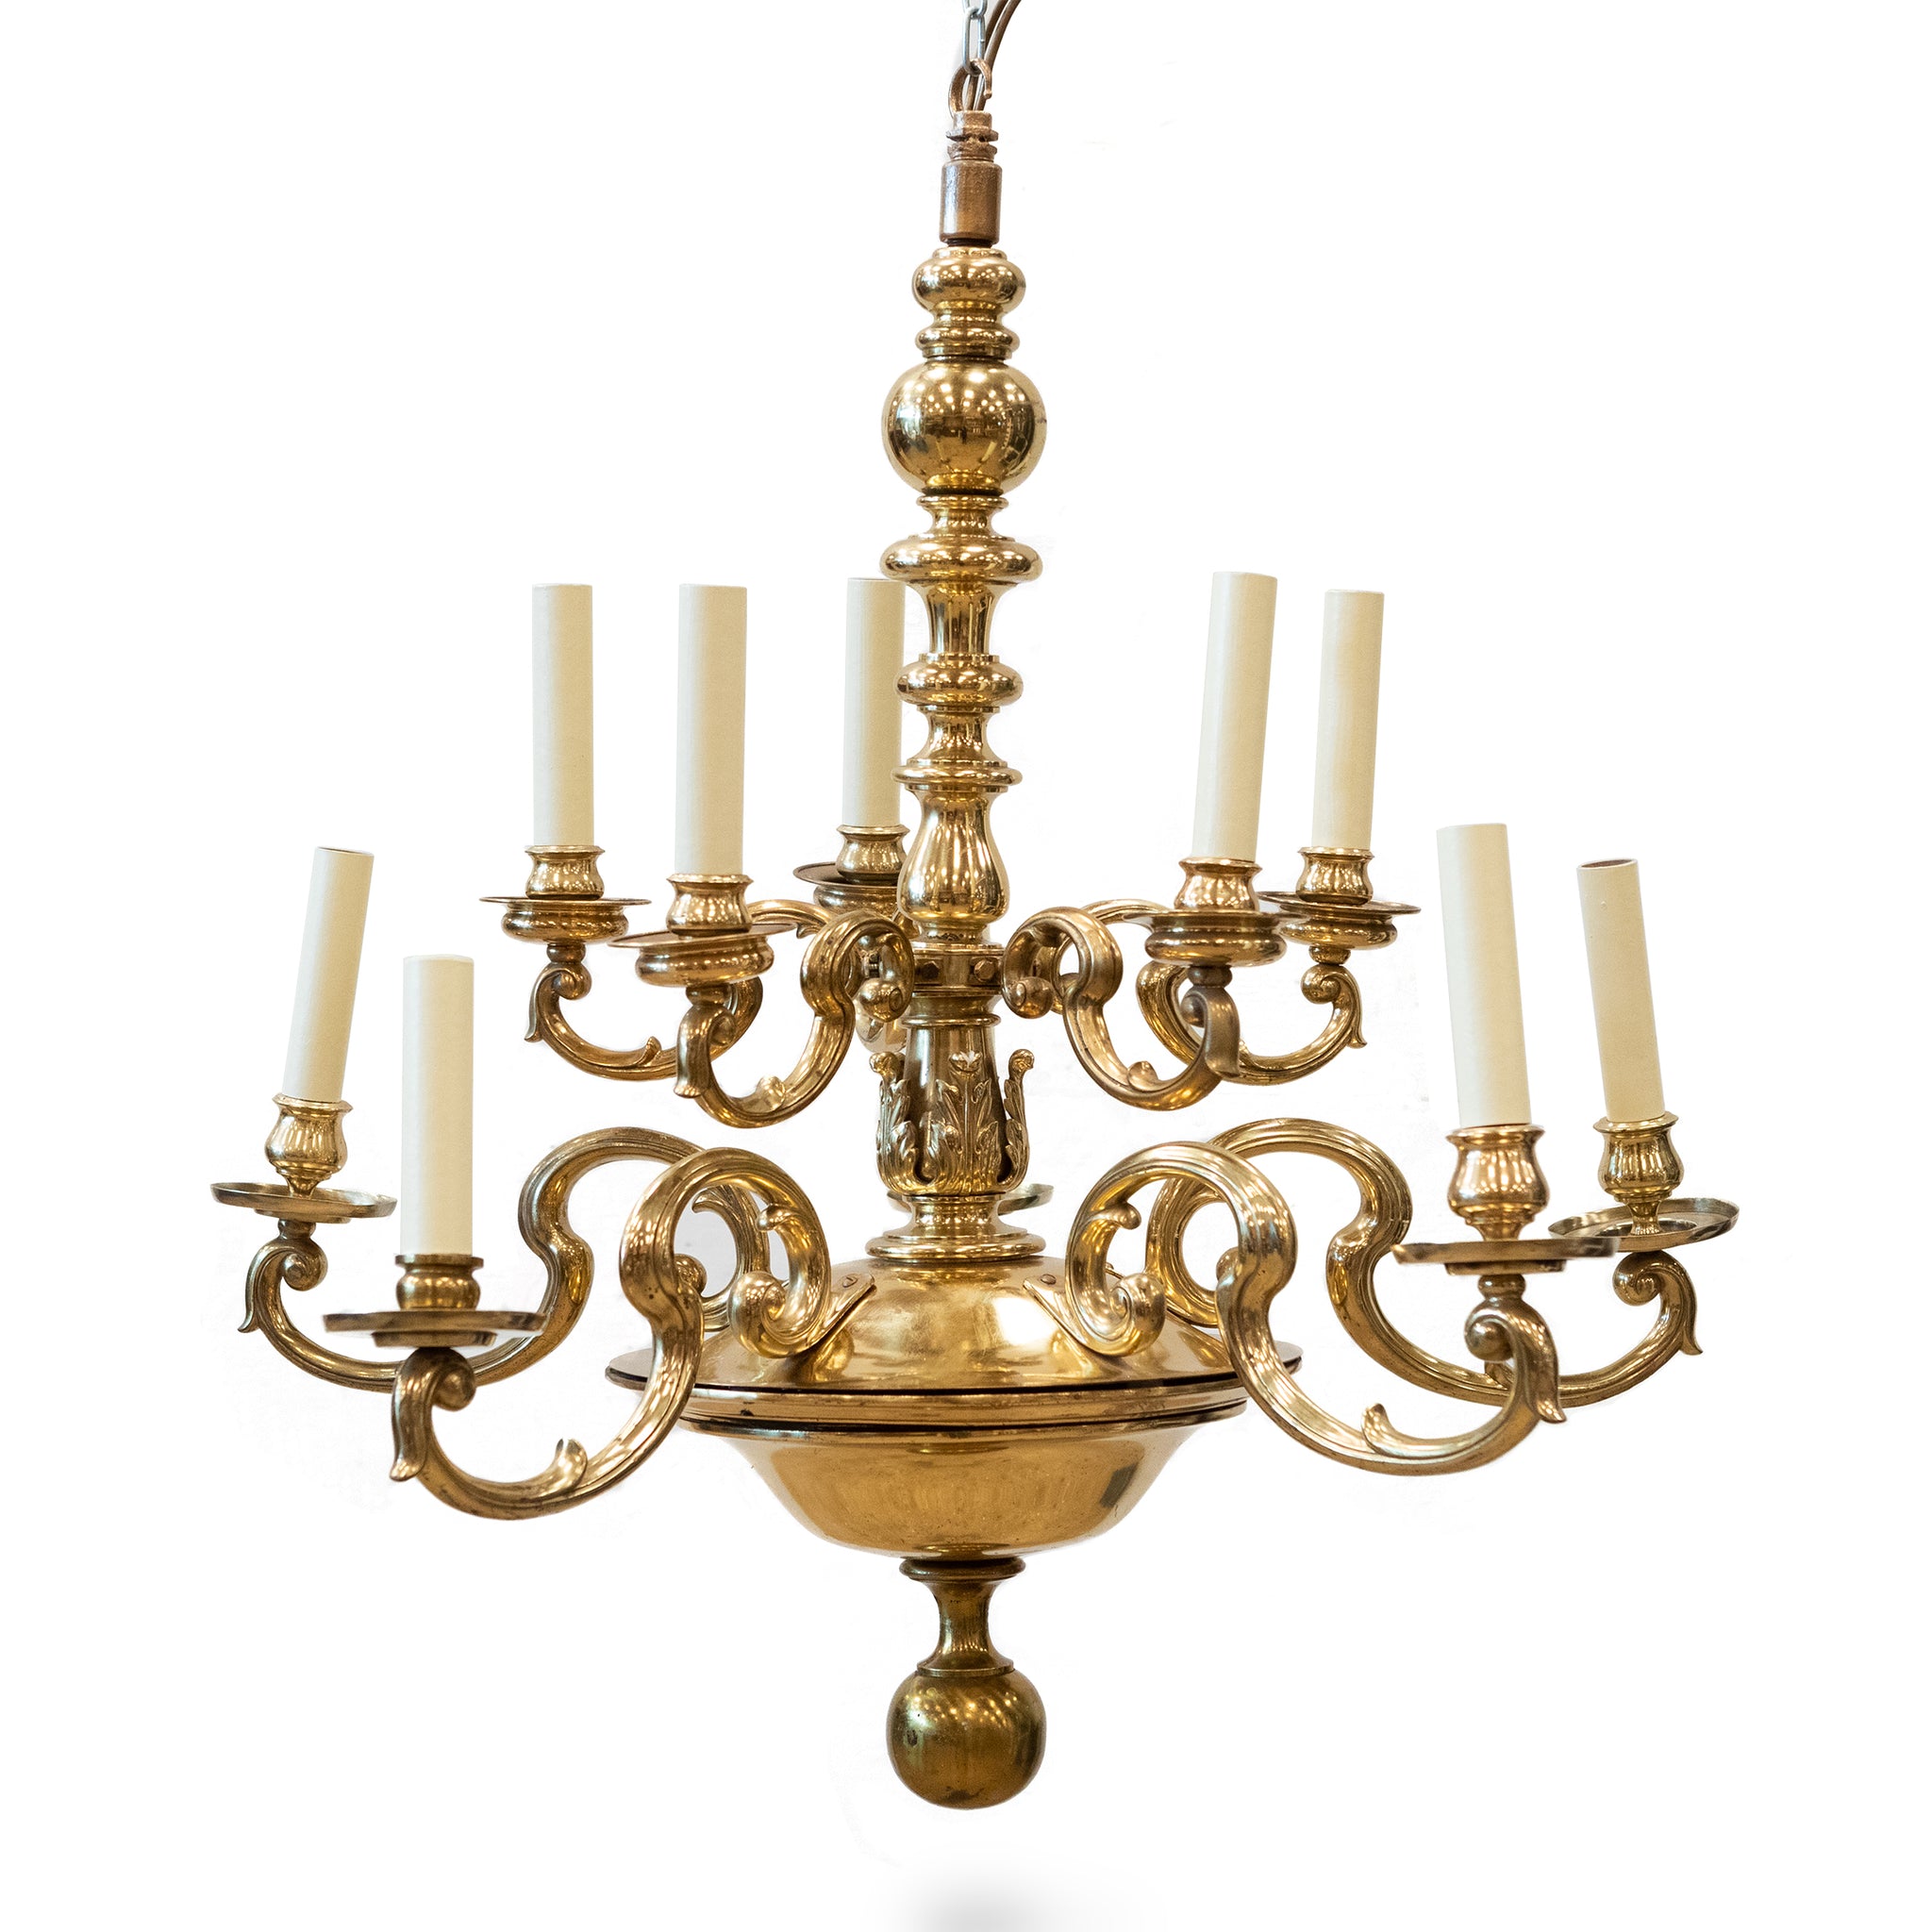 Large Reclaimed Brass Chandelier  12 Arm - The Architectural Forum